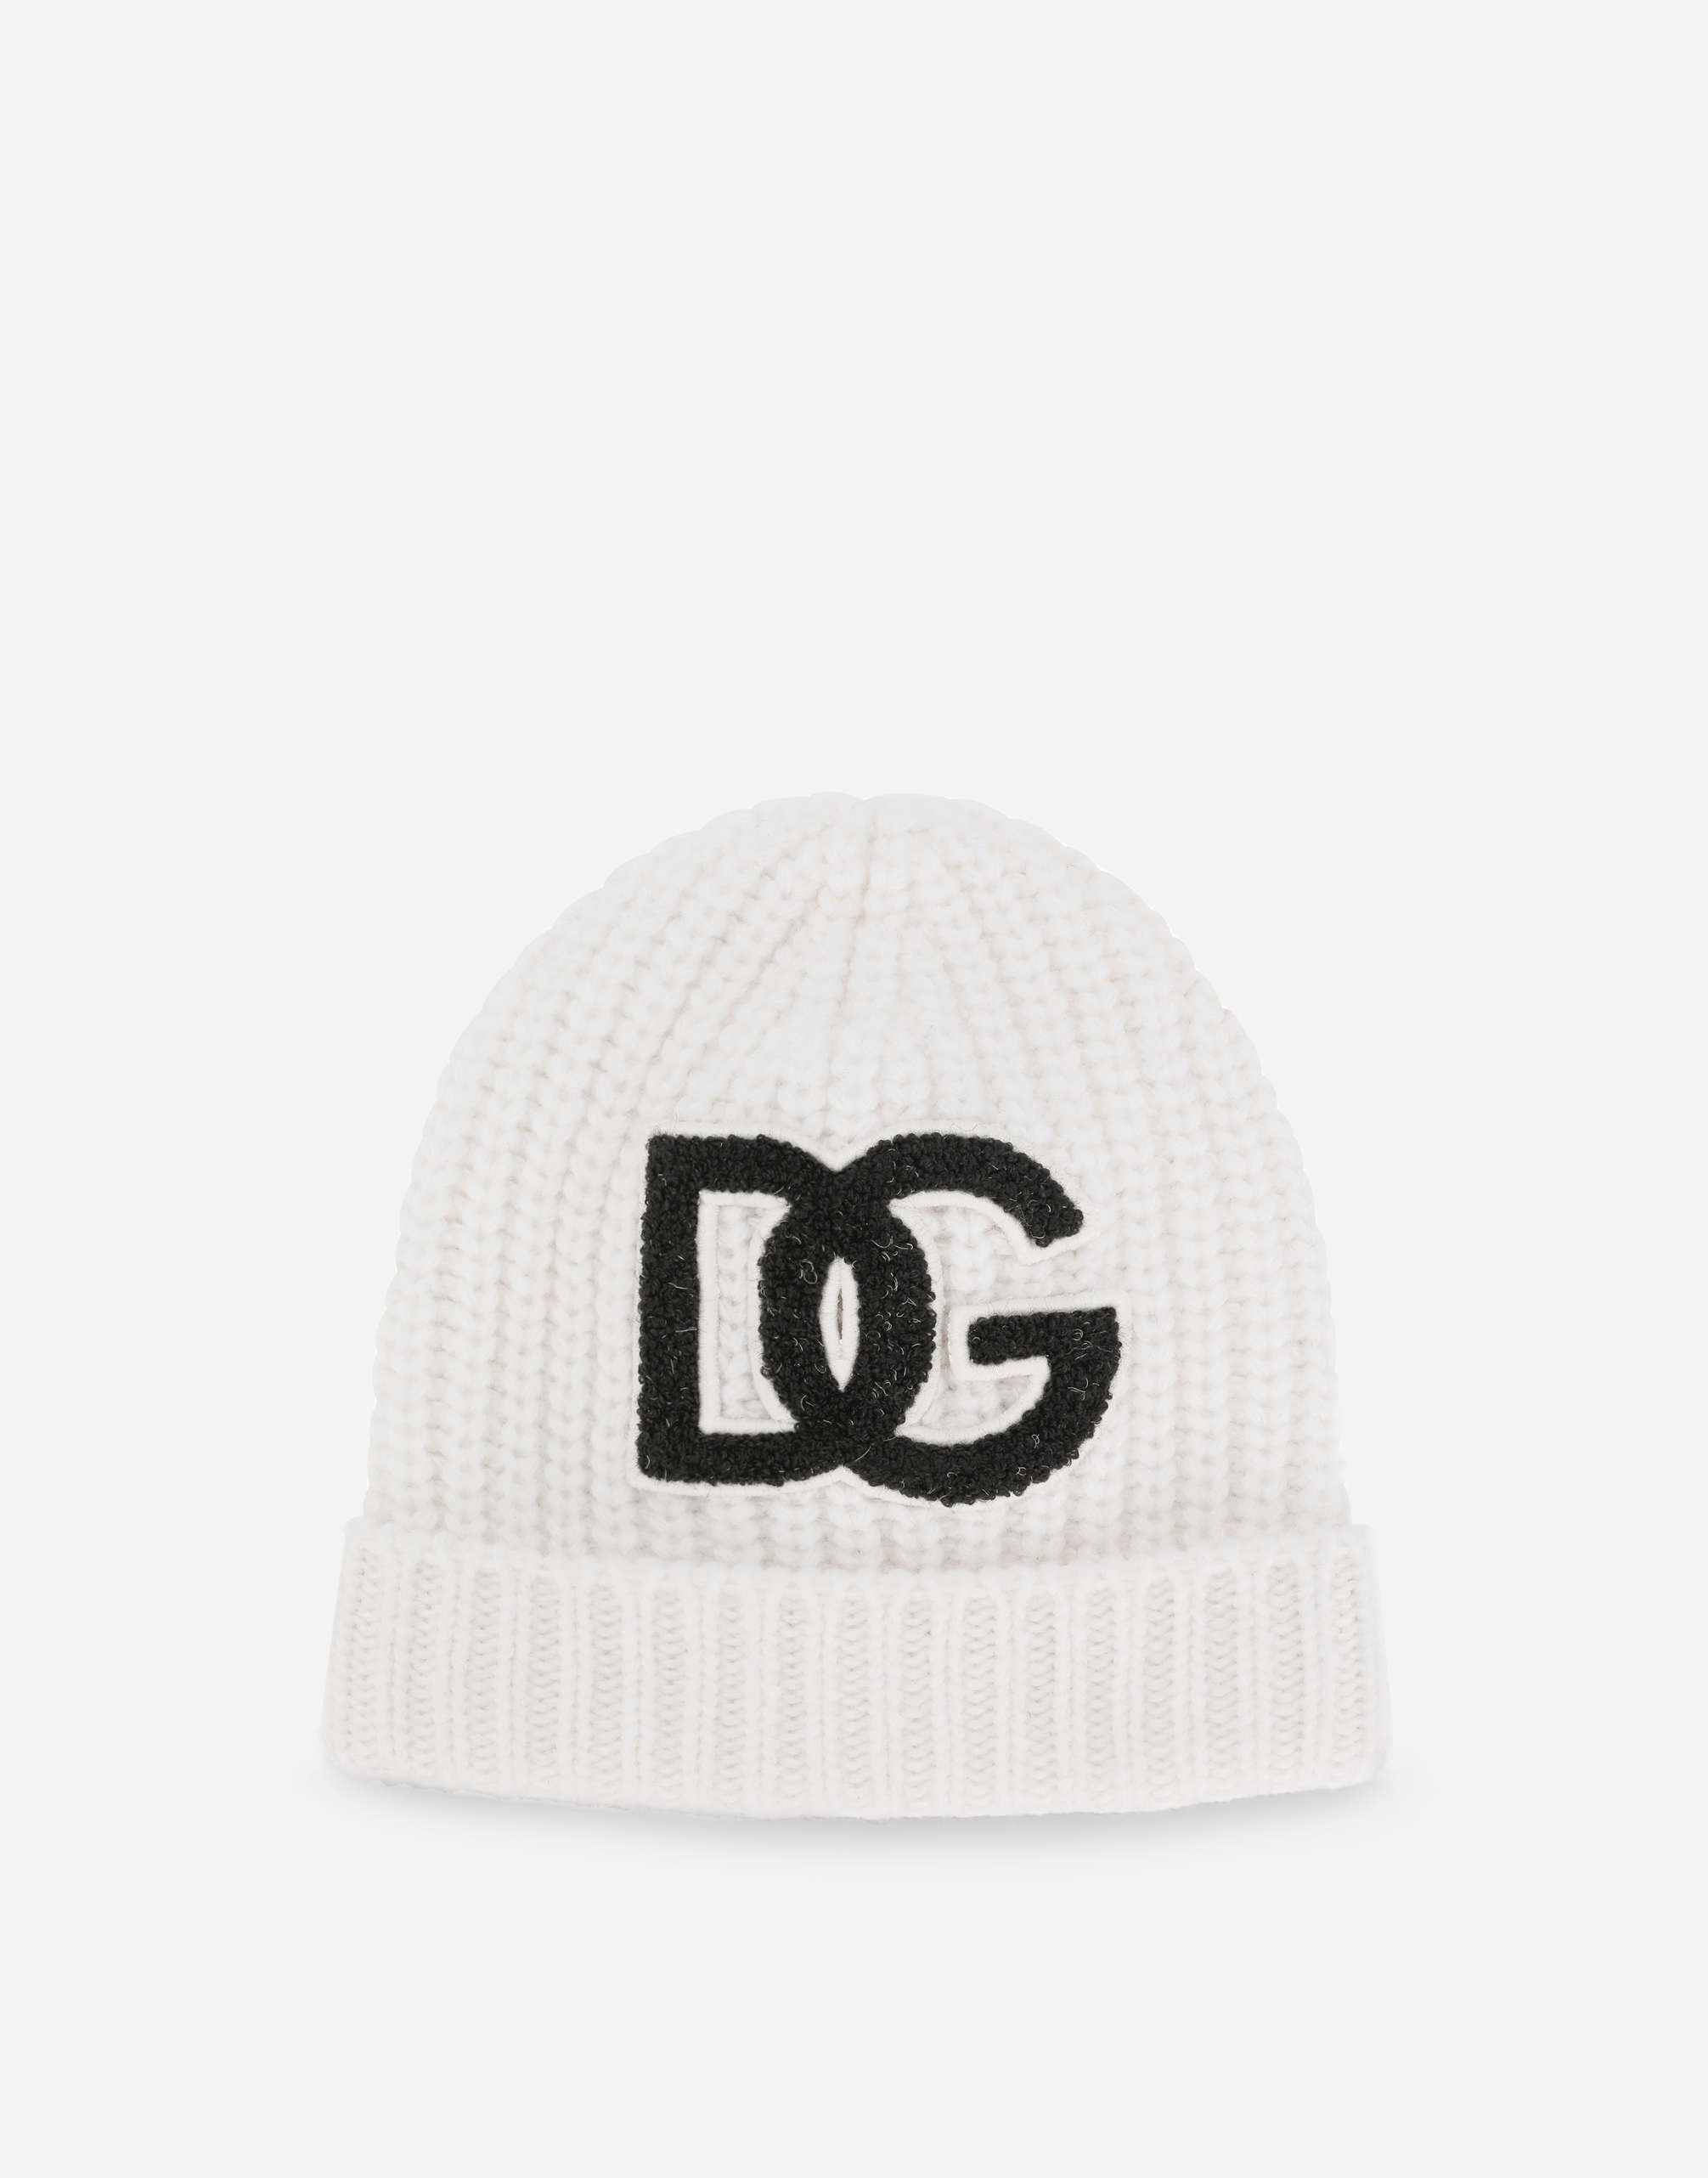 Ribbed knit hat with DG logo patch in White